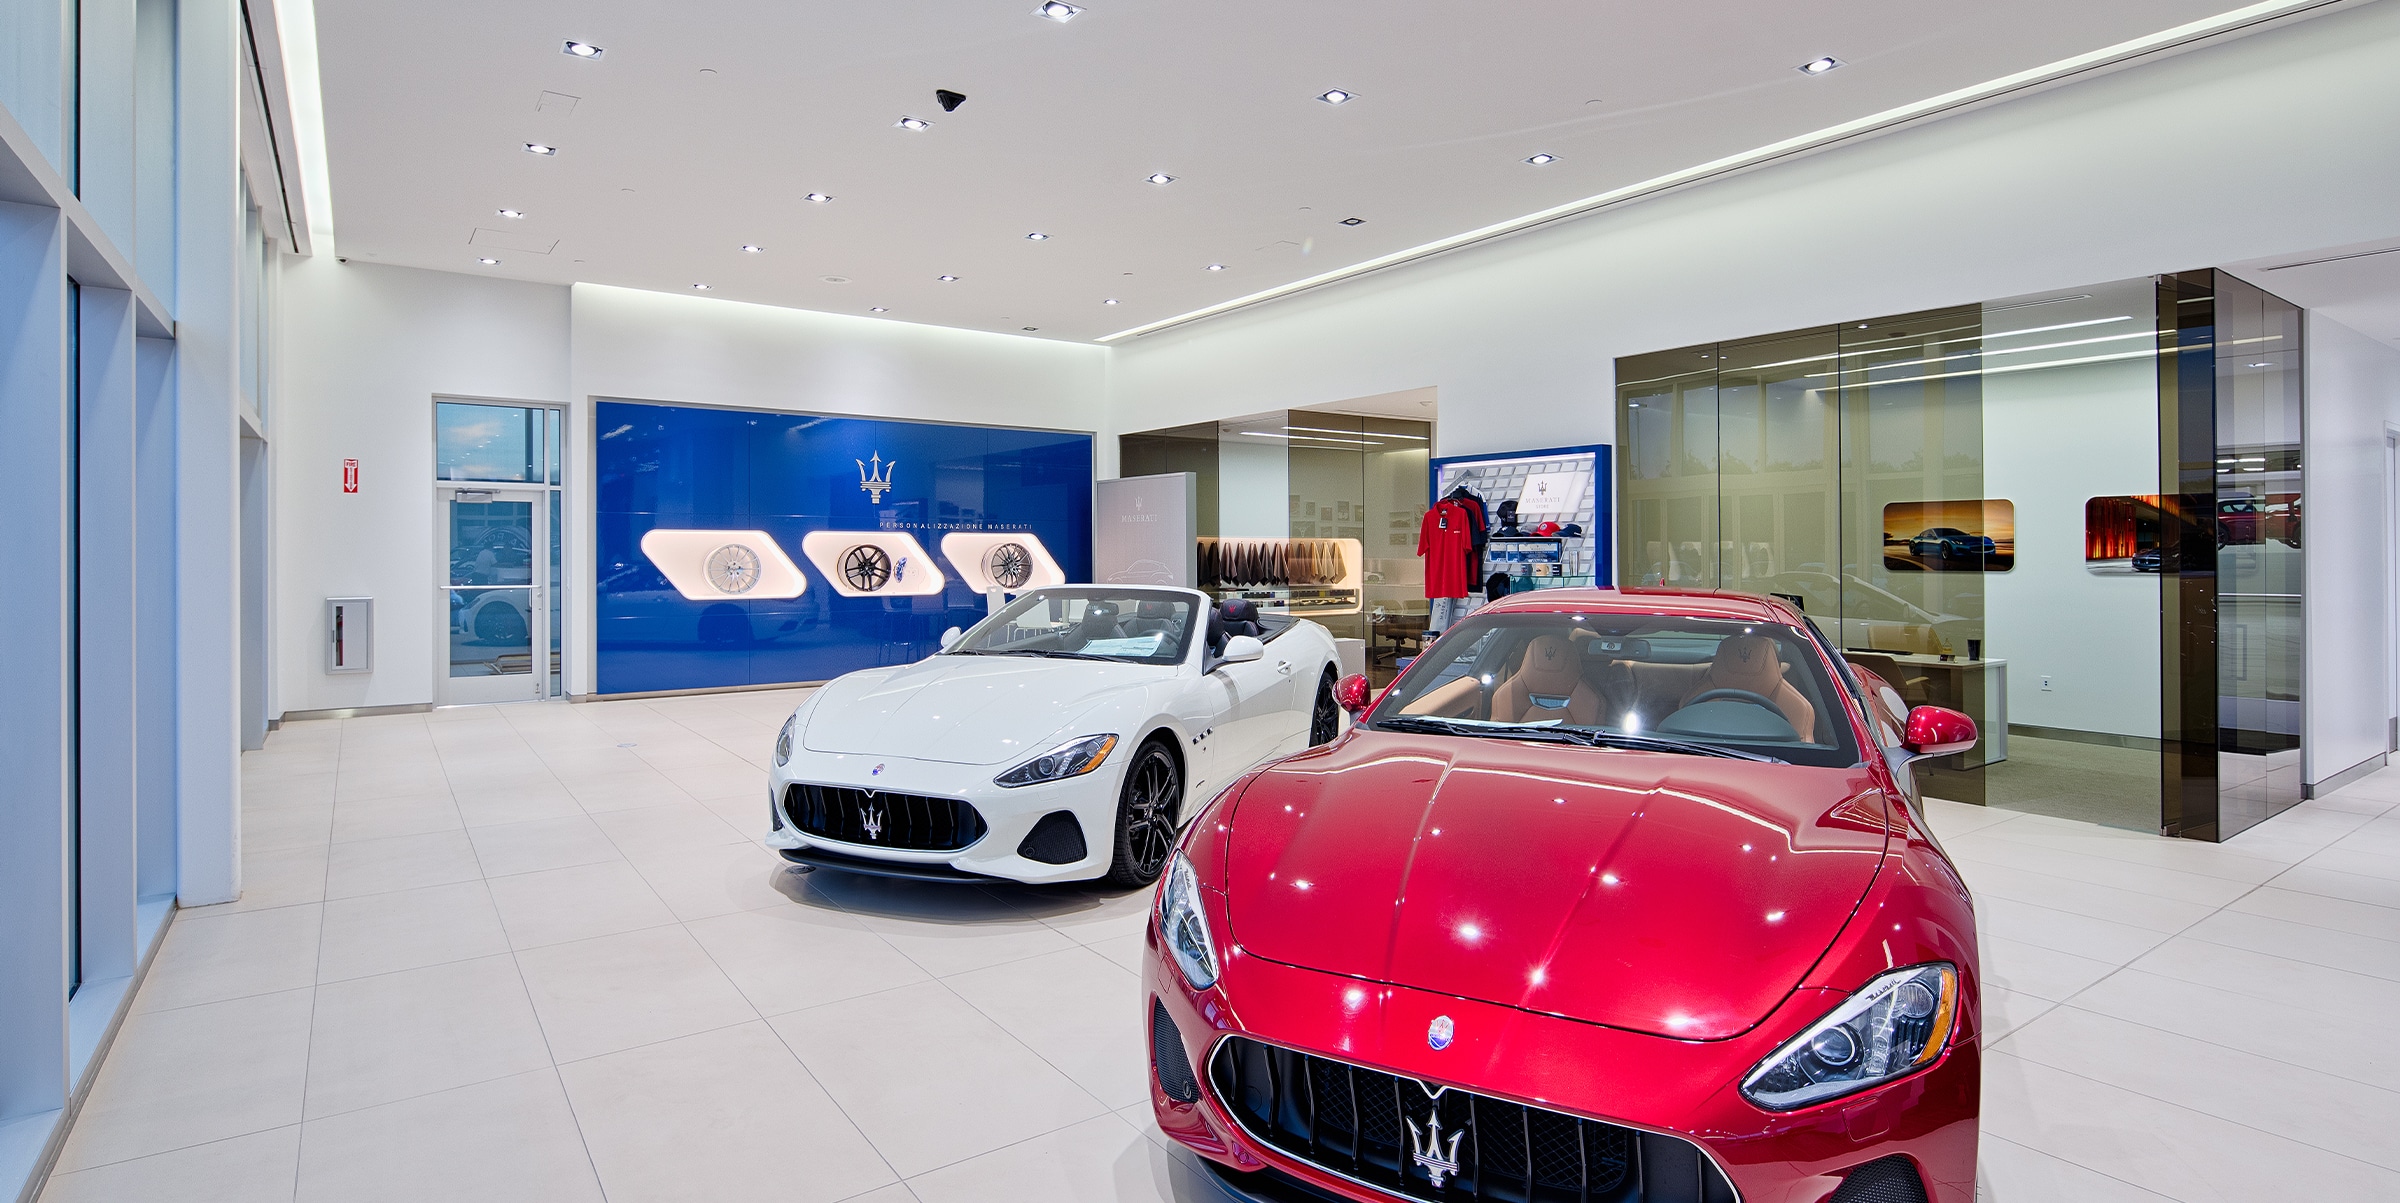 Casestudy Galleryimage Maserati 1 - WLS Lighting Systems